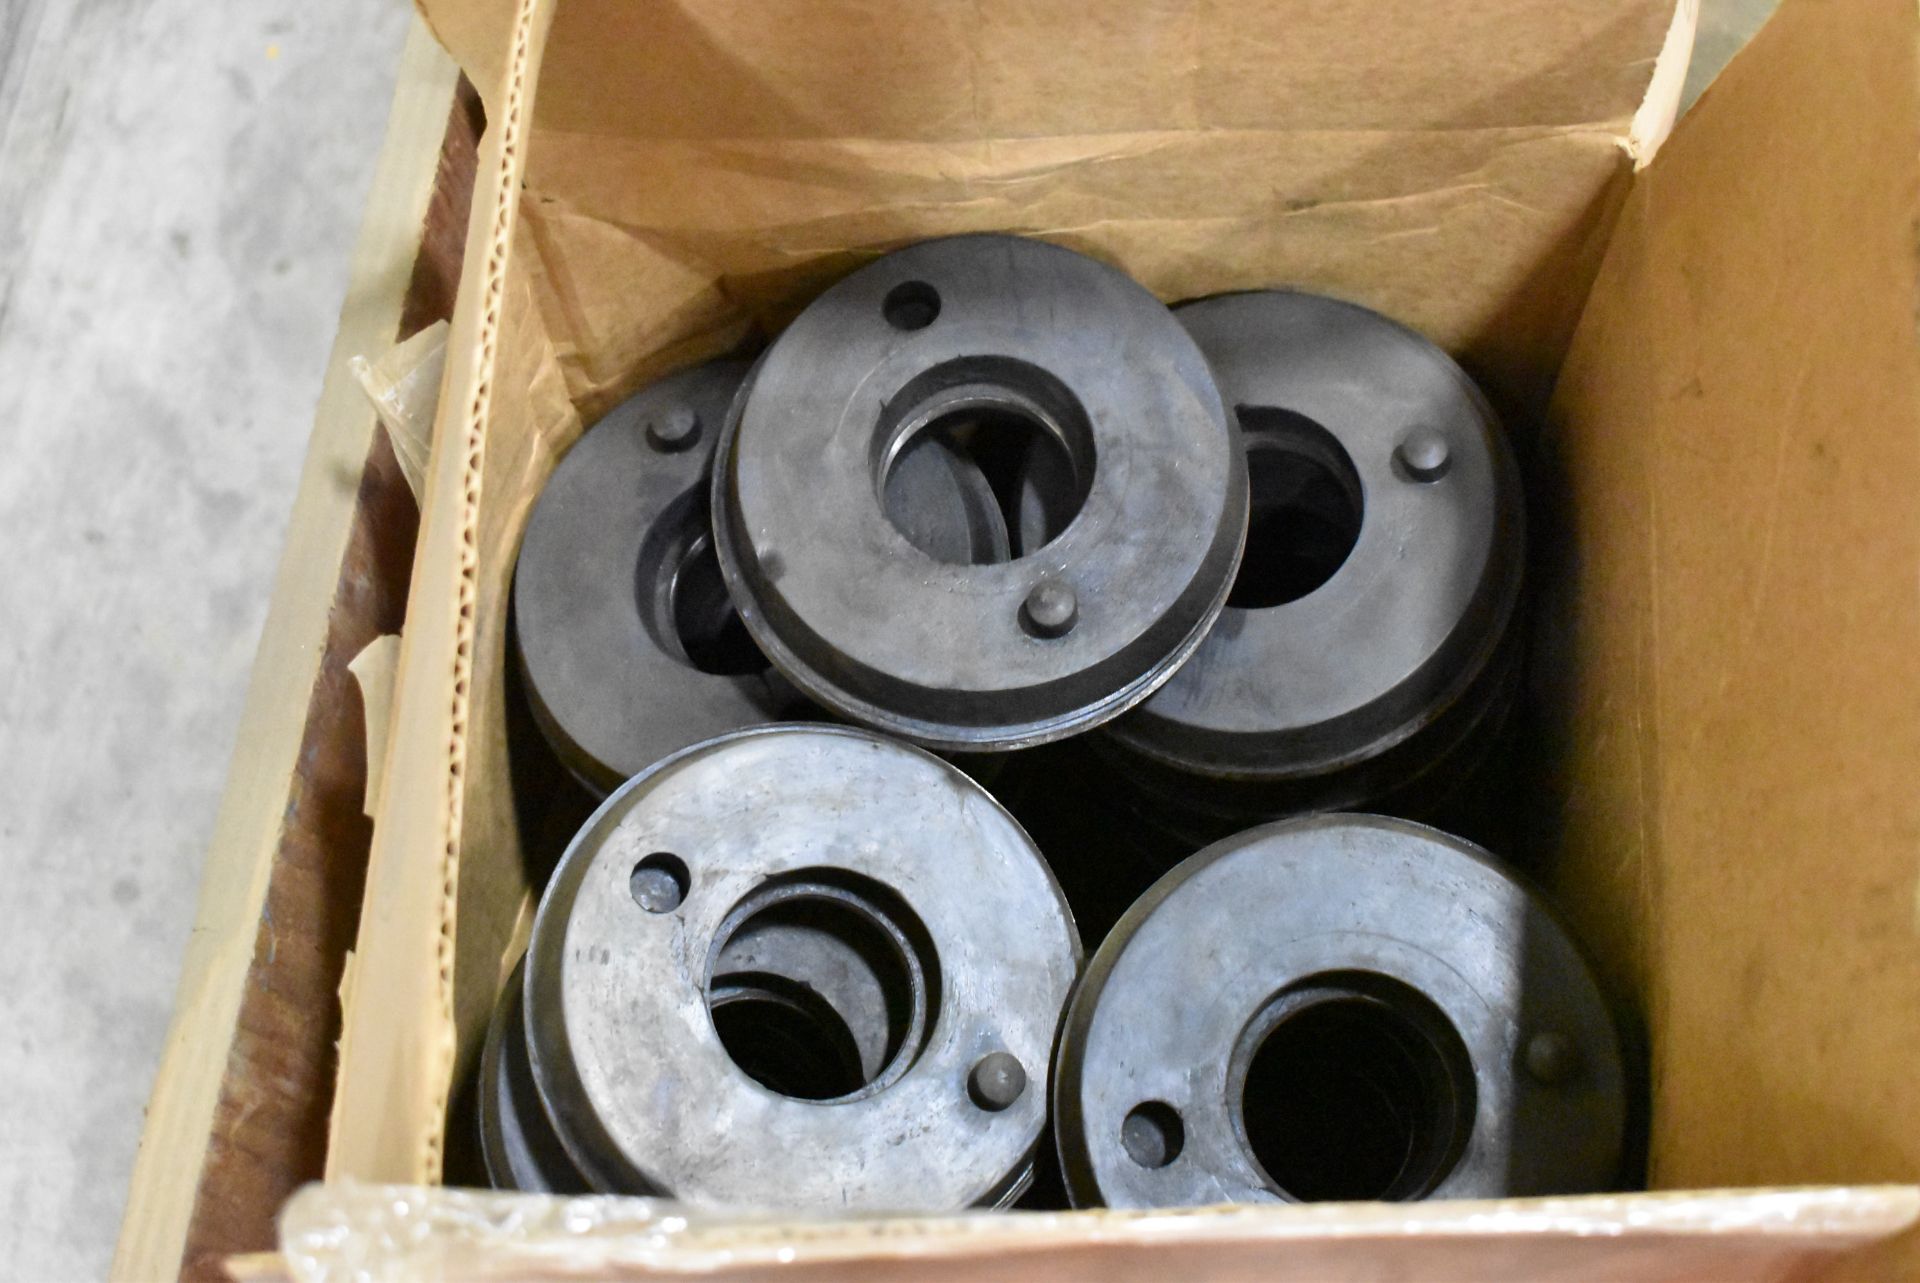 LOT/ SKID WITH ABS BUSHINGS, HARDWARE, BAGS (CMD WAREHOUSE) [CMD-059-22S] - Image 6 of 7